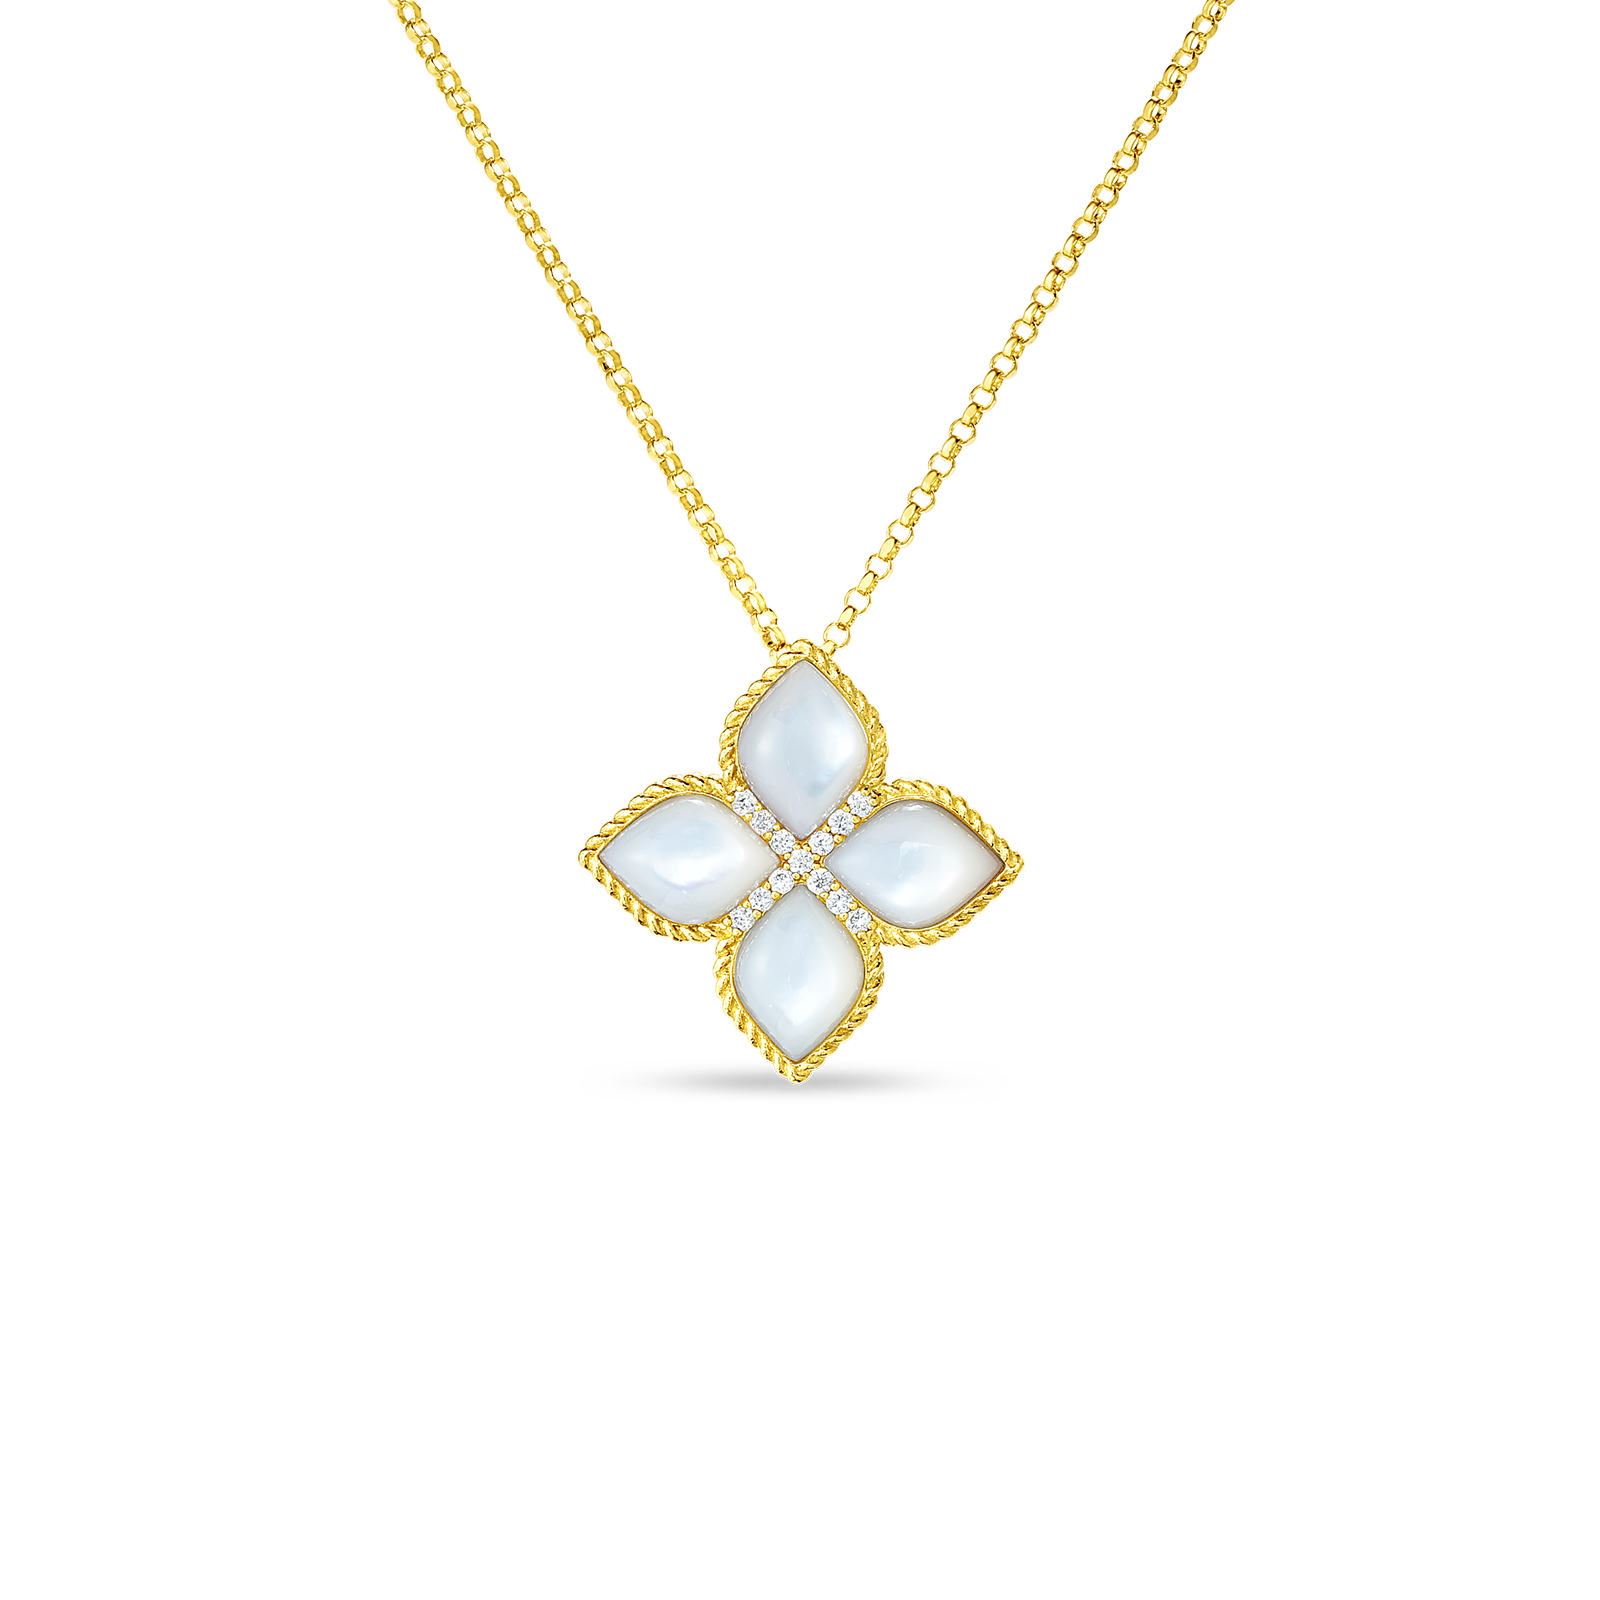 Venetian Princess Large Flower Pendant Necklace 18K Gold with Diamonds and Mother of Pearl